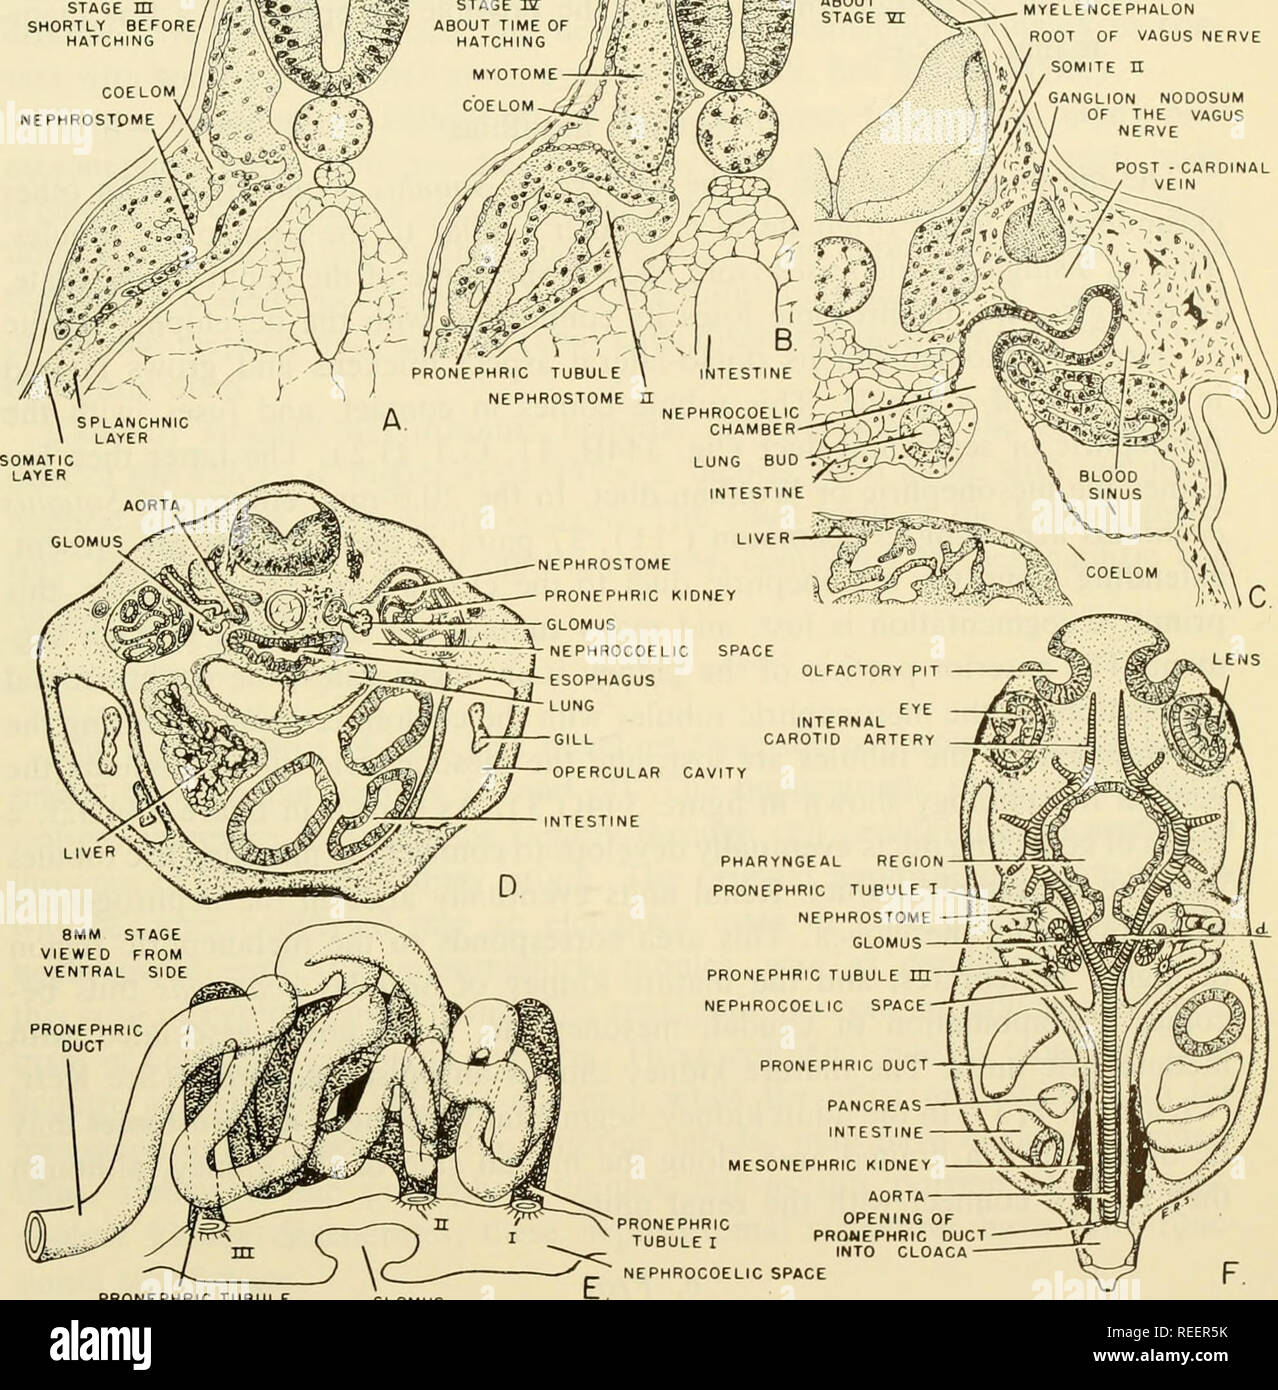 . Comparative embryology of the vertebrates; with 2057 drawings and photos. grouped as 380 illus. Vertebrates -- Embryology; Comparative embryology. STAGE m Hi, SHORTLY BEFORE HATCHING ELENCEPHALON ROOT OF VAGUS NERVE SOMITE n GANGLION NODOSUM OF THE VAGUS NERVE. PRONEPHRIC TUBULE Fig. 346. The developing pronephric kidney in the frog, Rana sylvatica (A-C and E, redrawn from Field, 1891, Bull. Mus. Comp. Zool. at Harvard College, vol. 21. E con- siderably modified). (A) Transverse section through developing second pronephric tubule of frog embryo at a time when the neural tube is completely cl Stock Photo